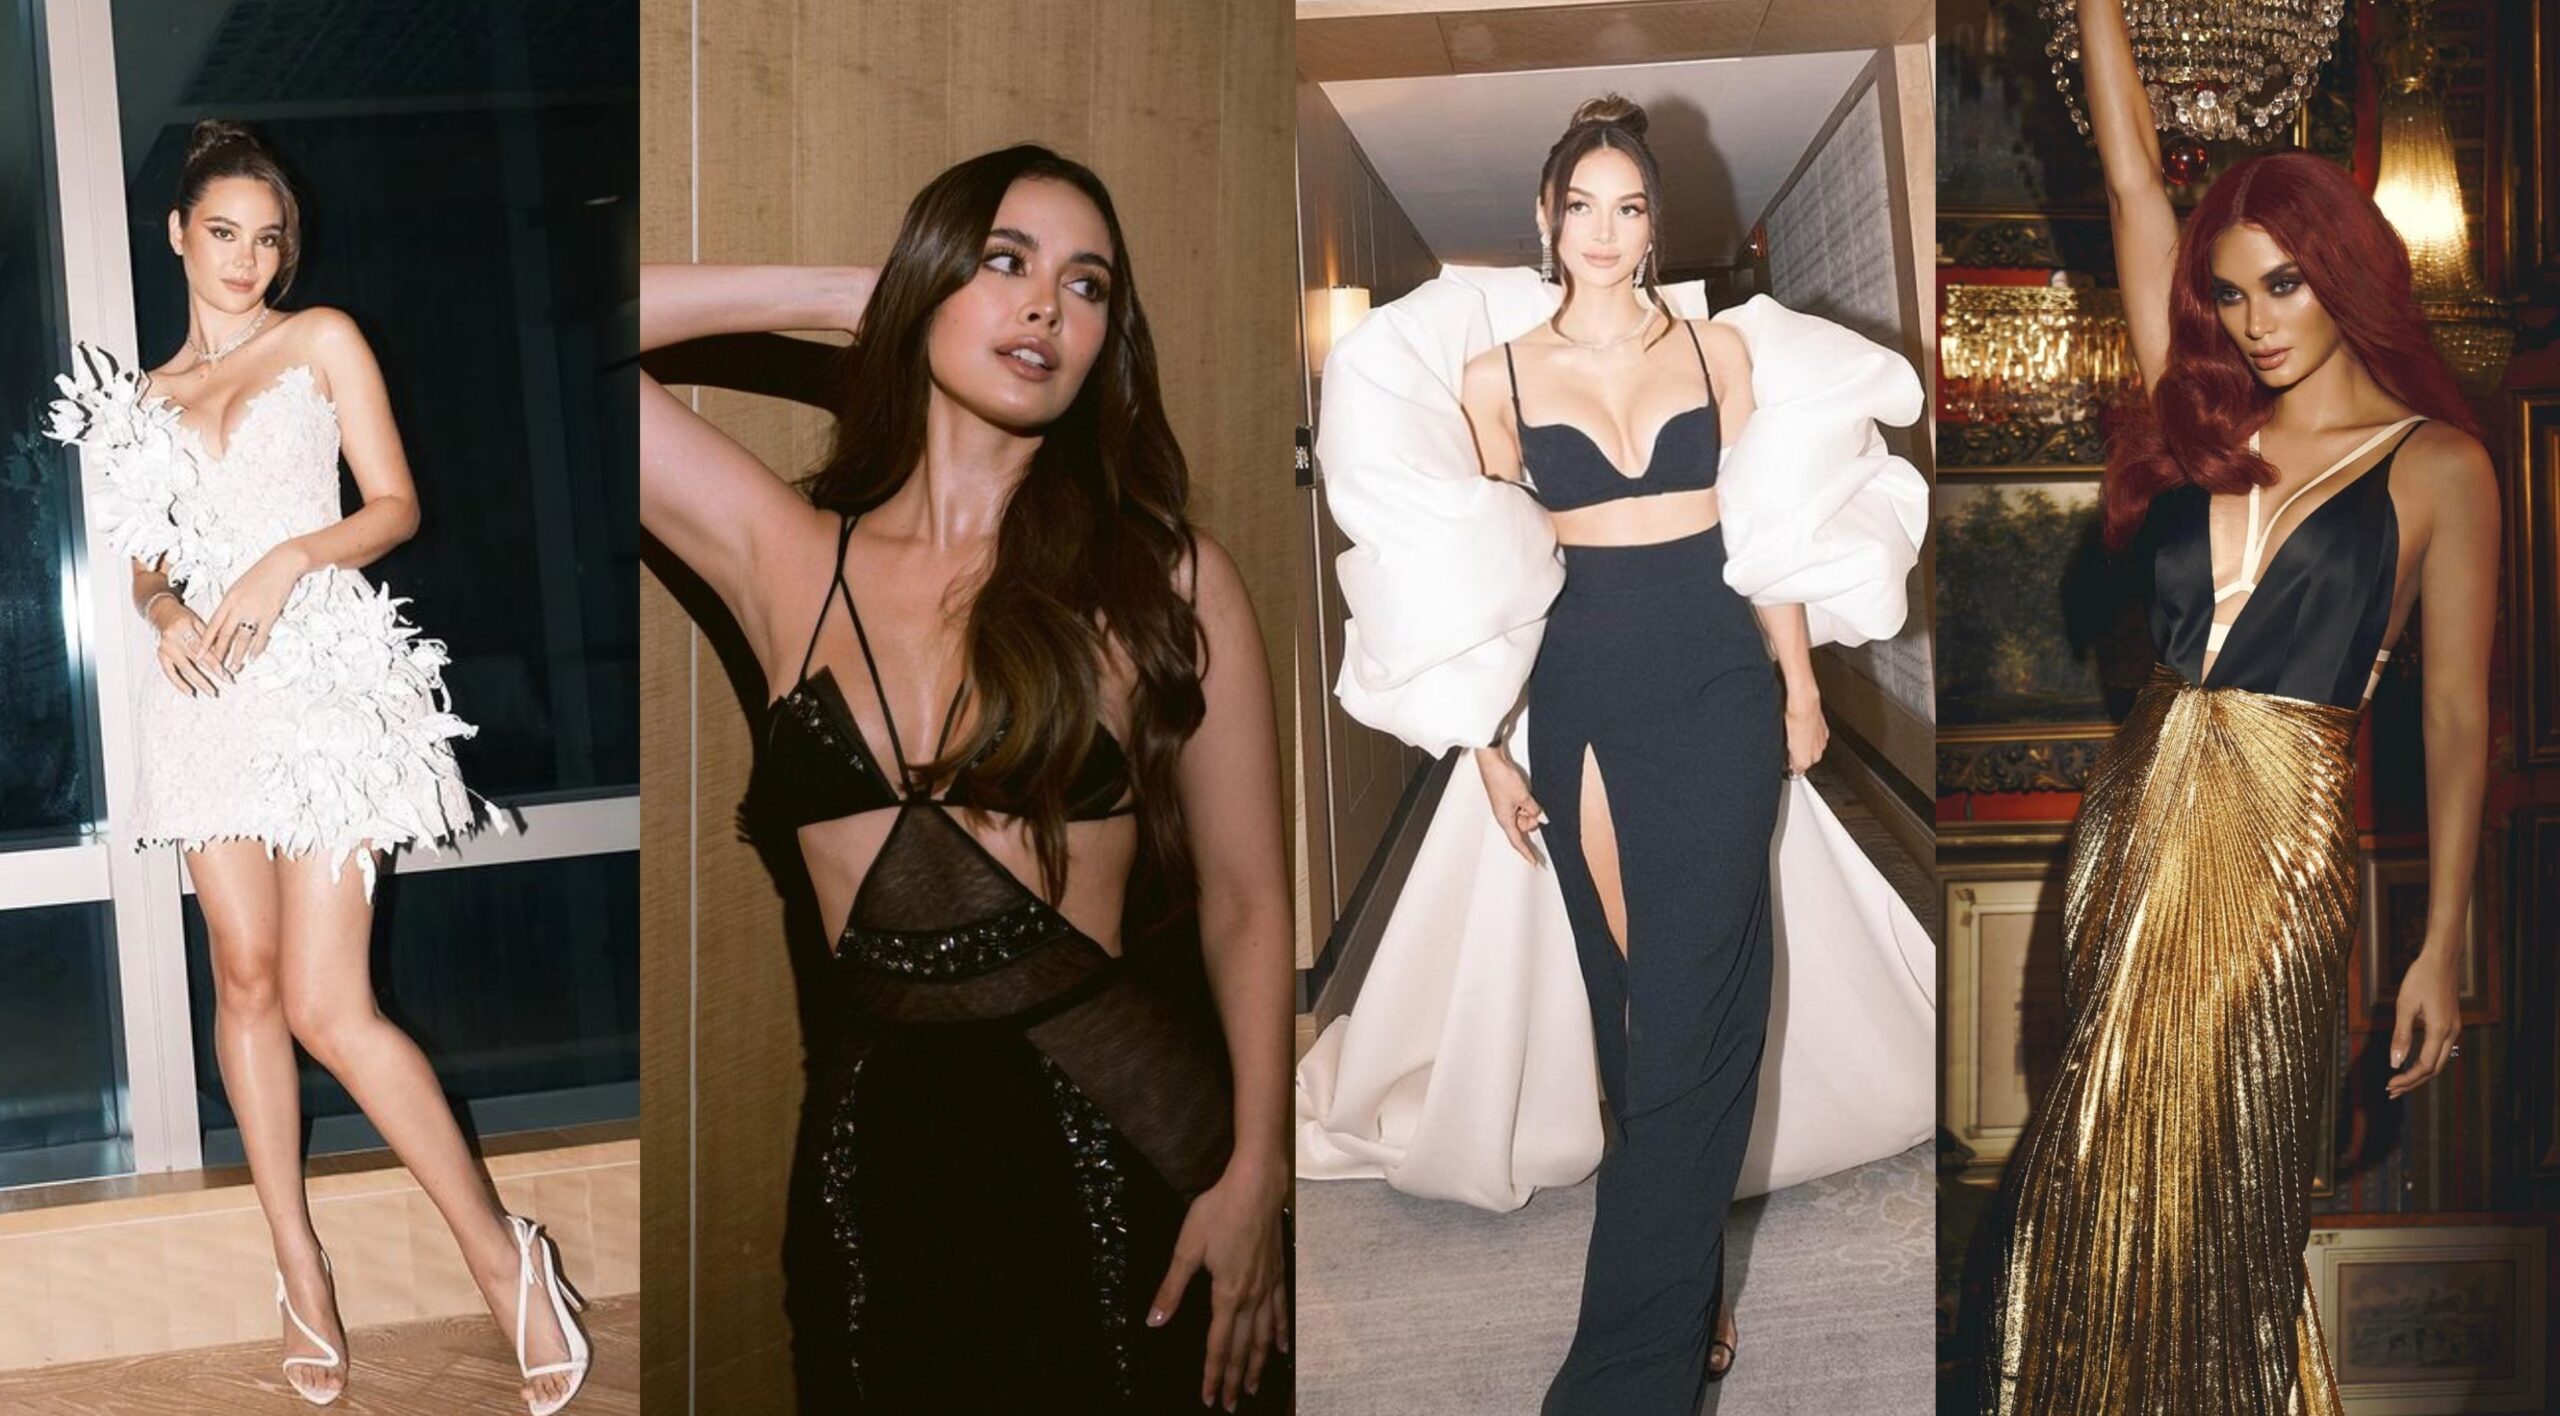 IN PHOTOS: Filipino beauty queens dazzle in full glam at Vogue Philippines gala